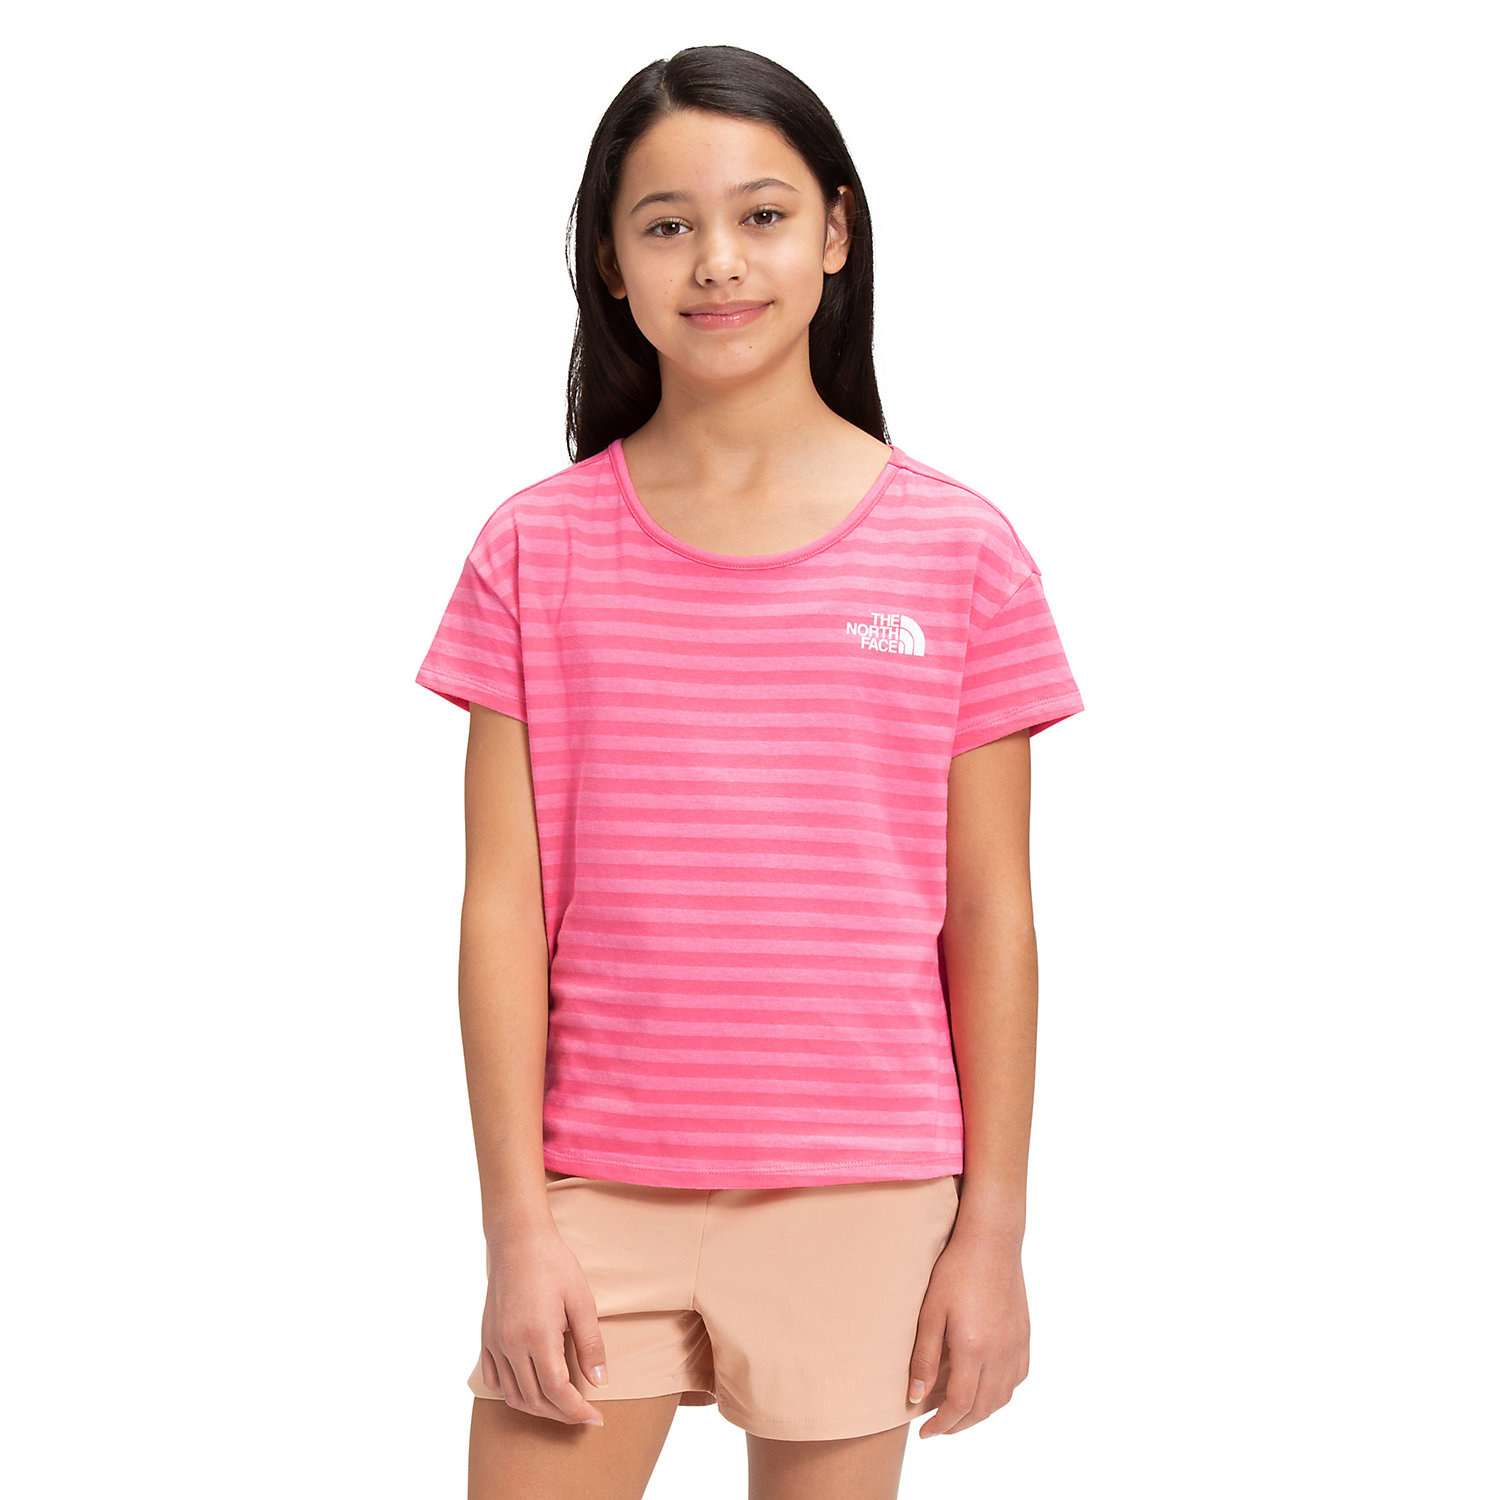 The North Face Girls Tri-Blend SS Tee